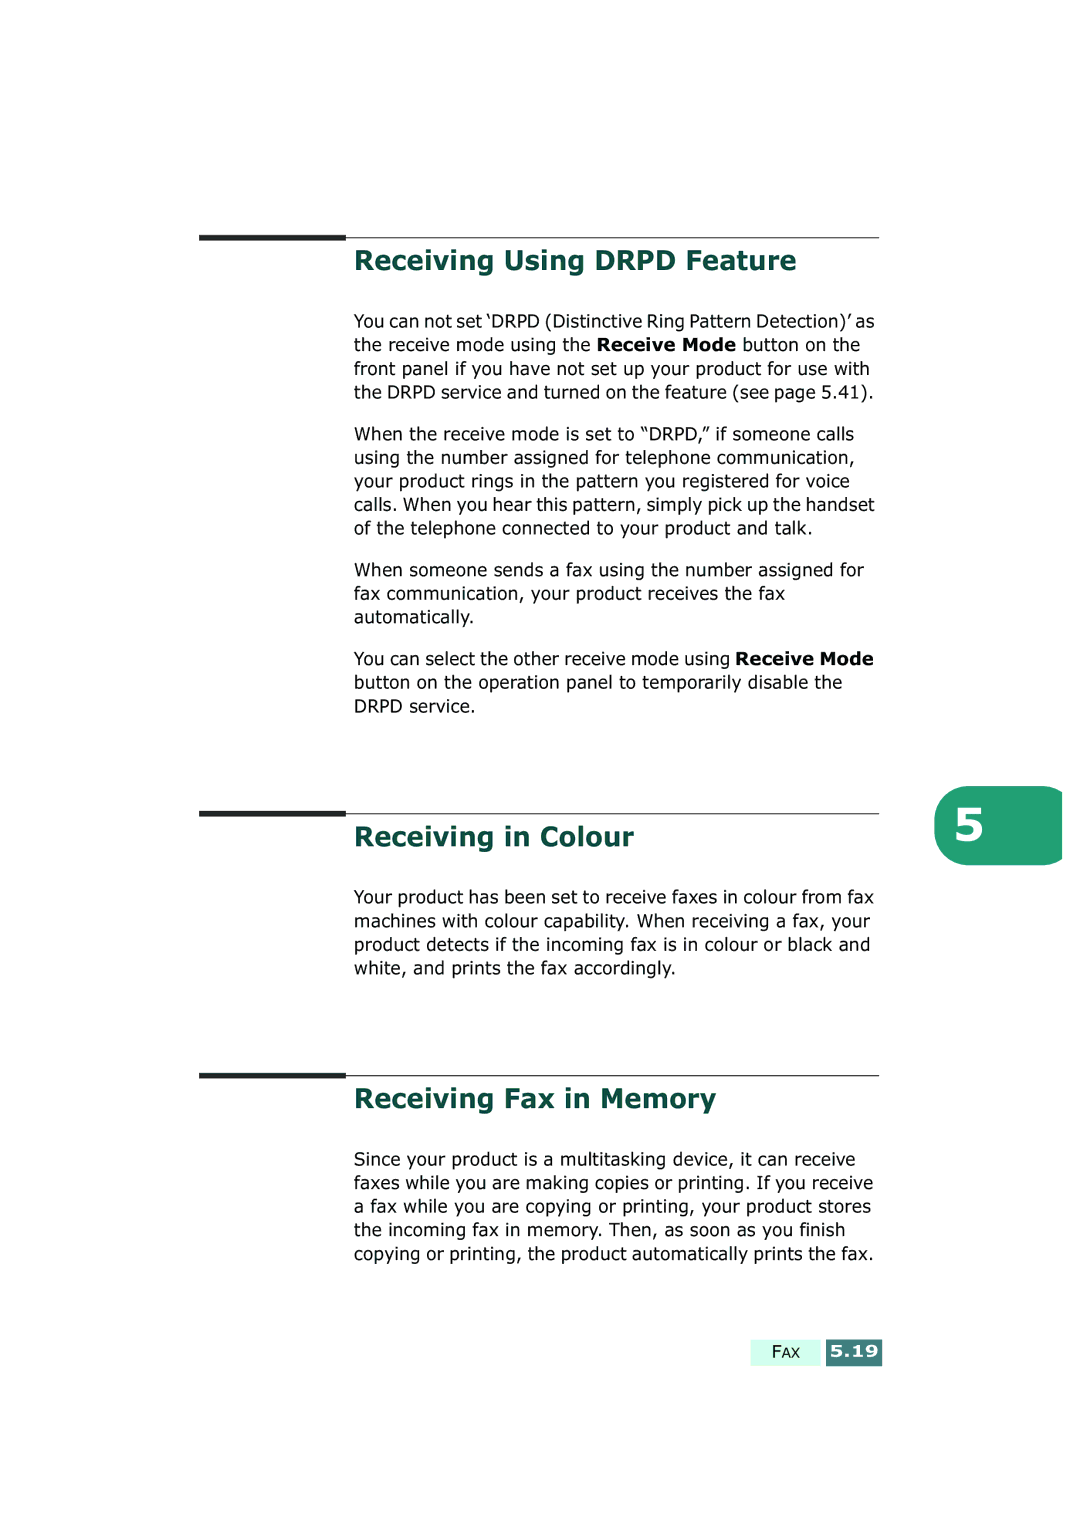 Samsung SF-430 manual Receiving Using Drpd Feature, Receiving in Colour, Receiving Fax in Memory 